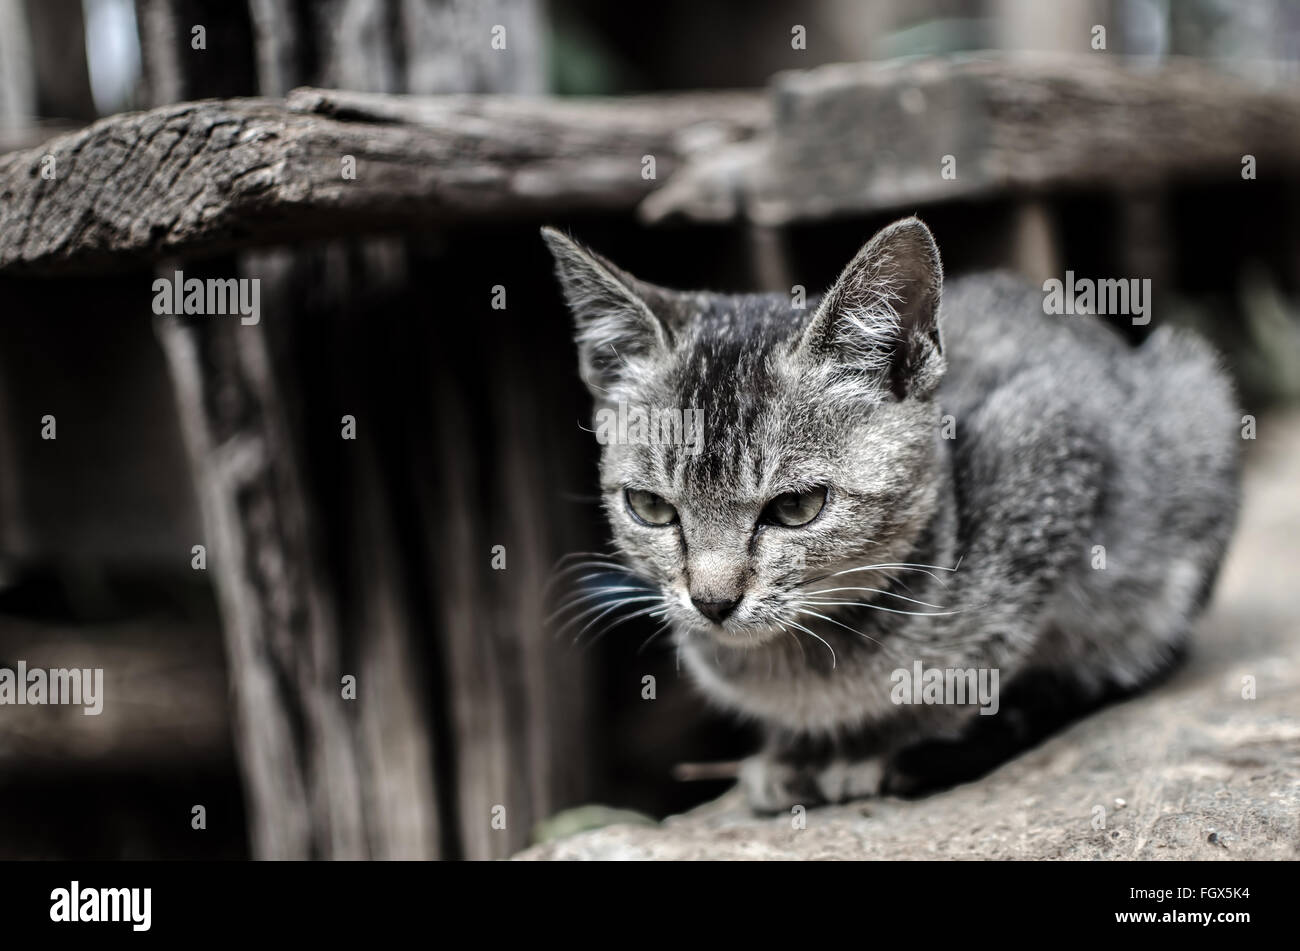 A cat ready to jump Stock Photo